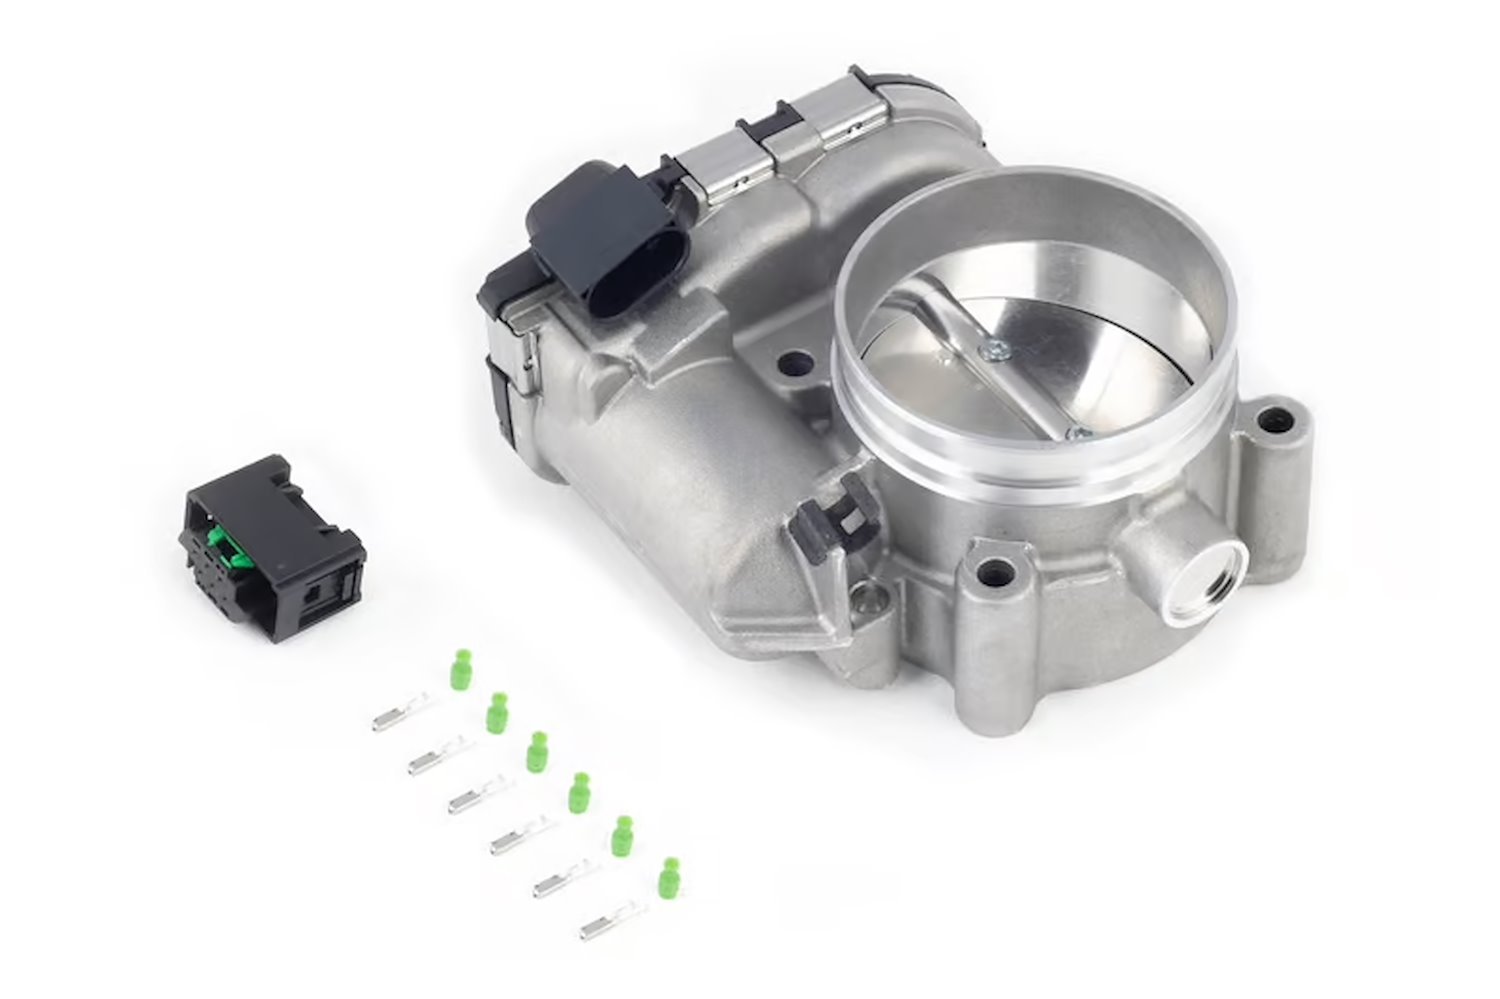 HT-011801 Bosch 68 mm Electronic Throttle Body, Includes Connector and-Pins